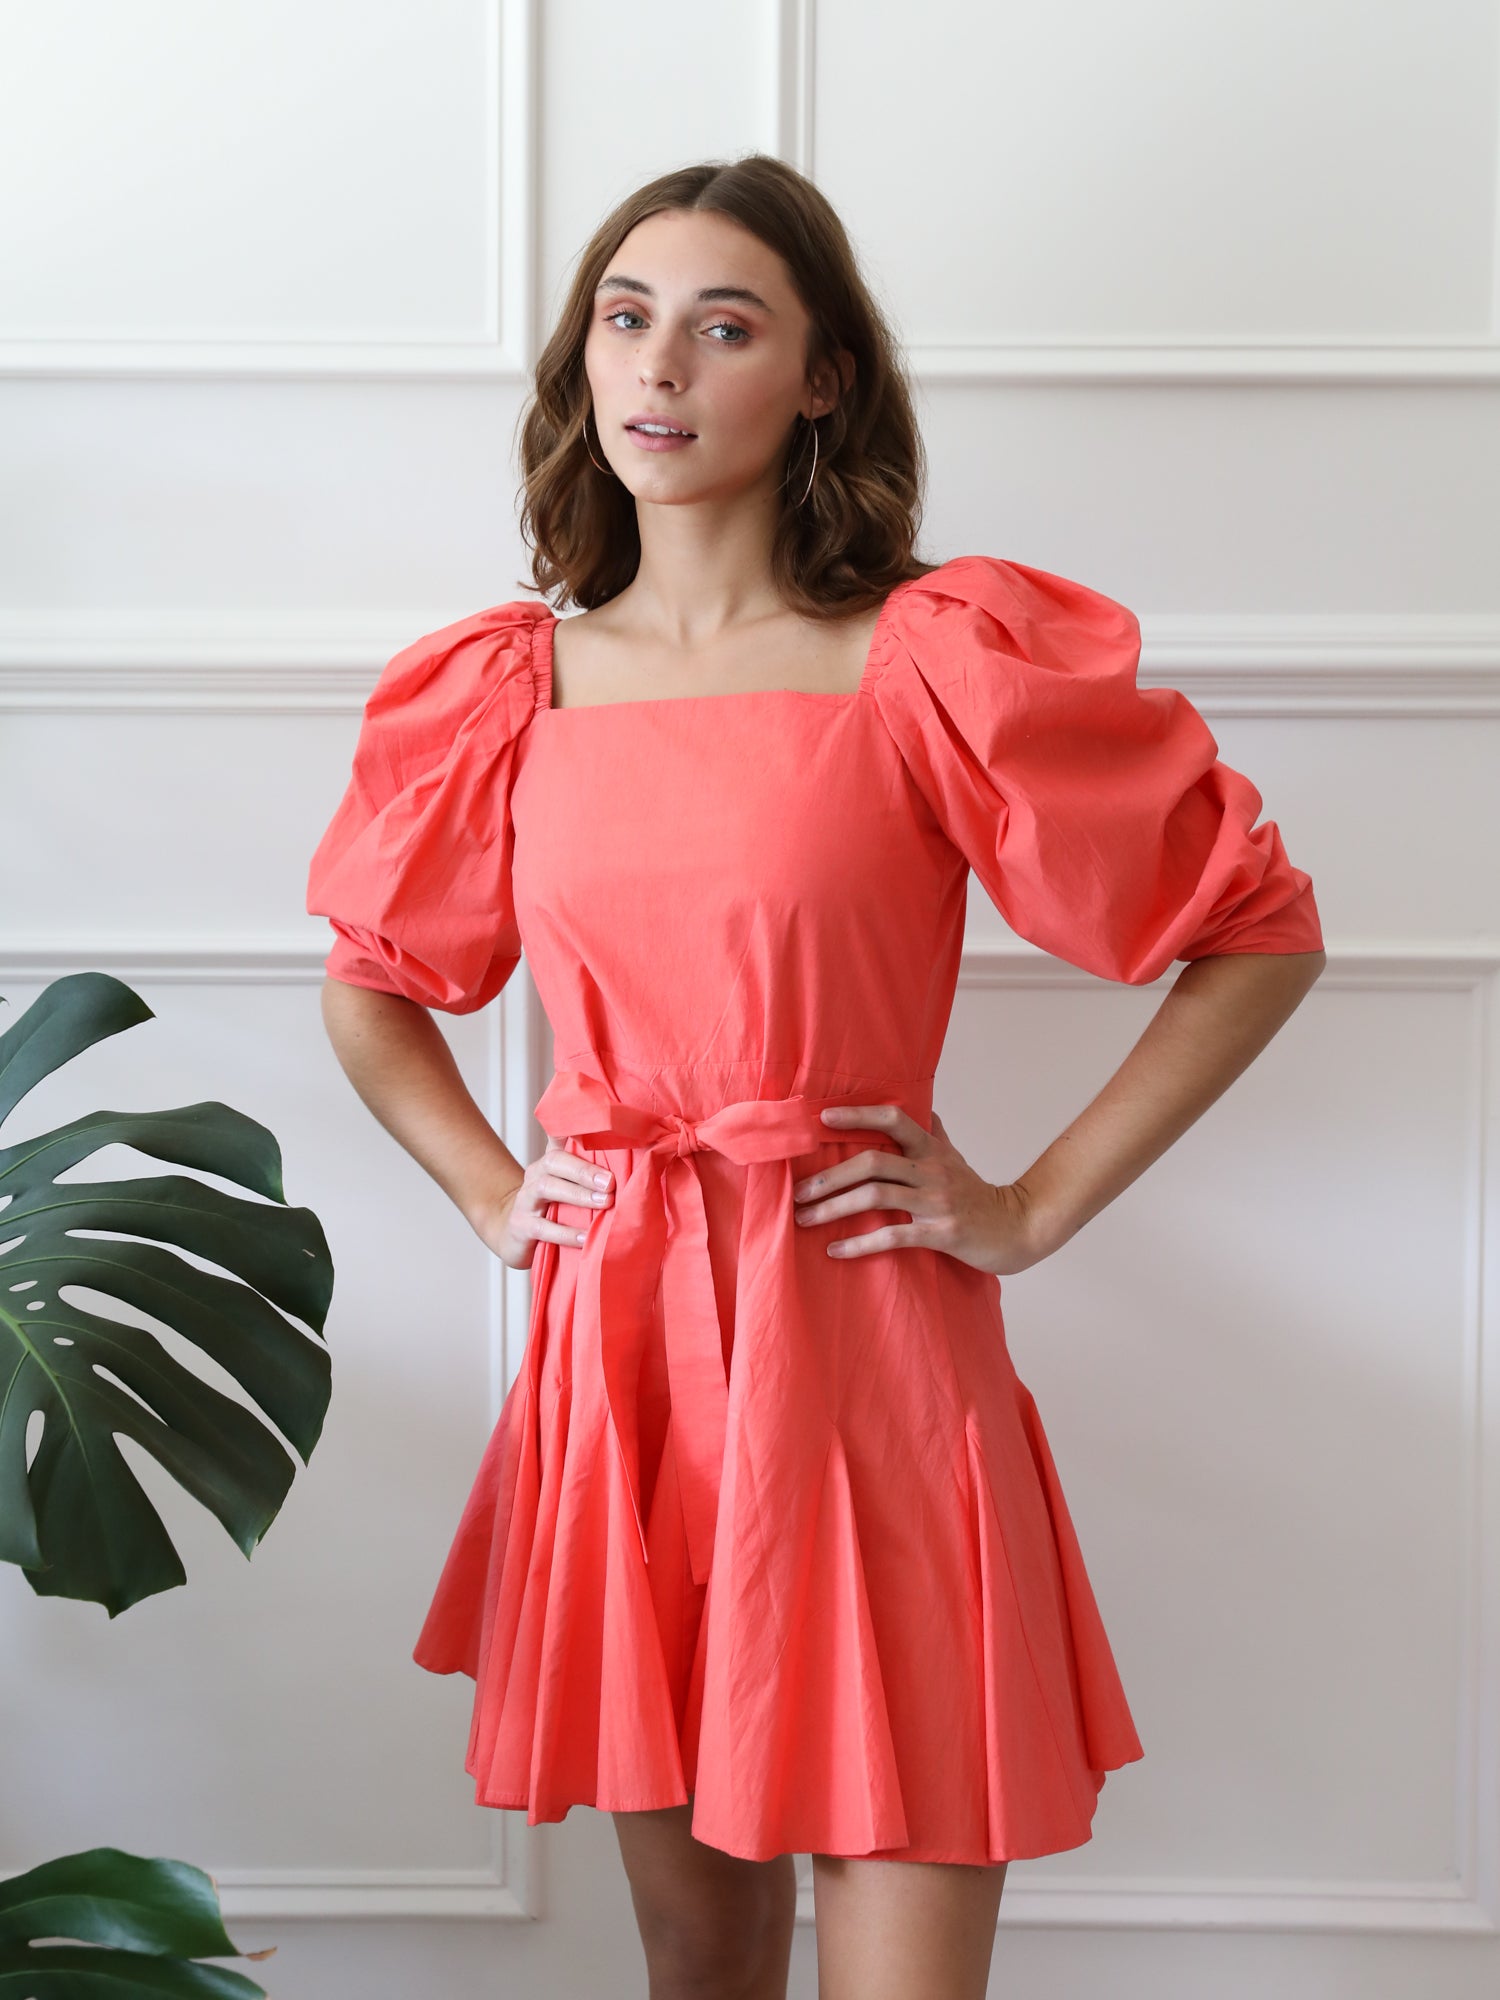 MILLE Clothing Anais Dress in Melon